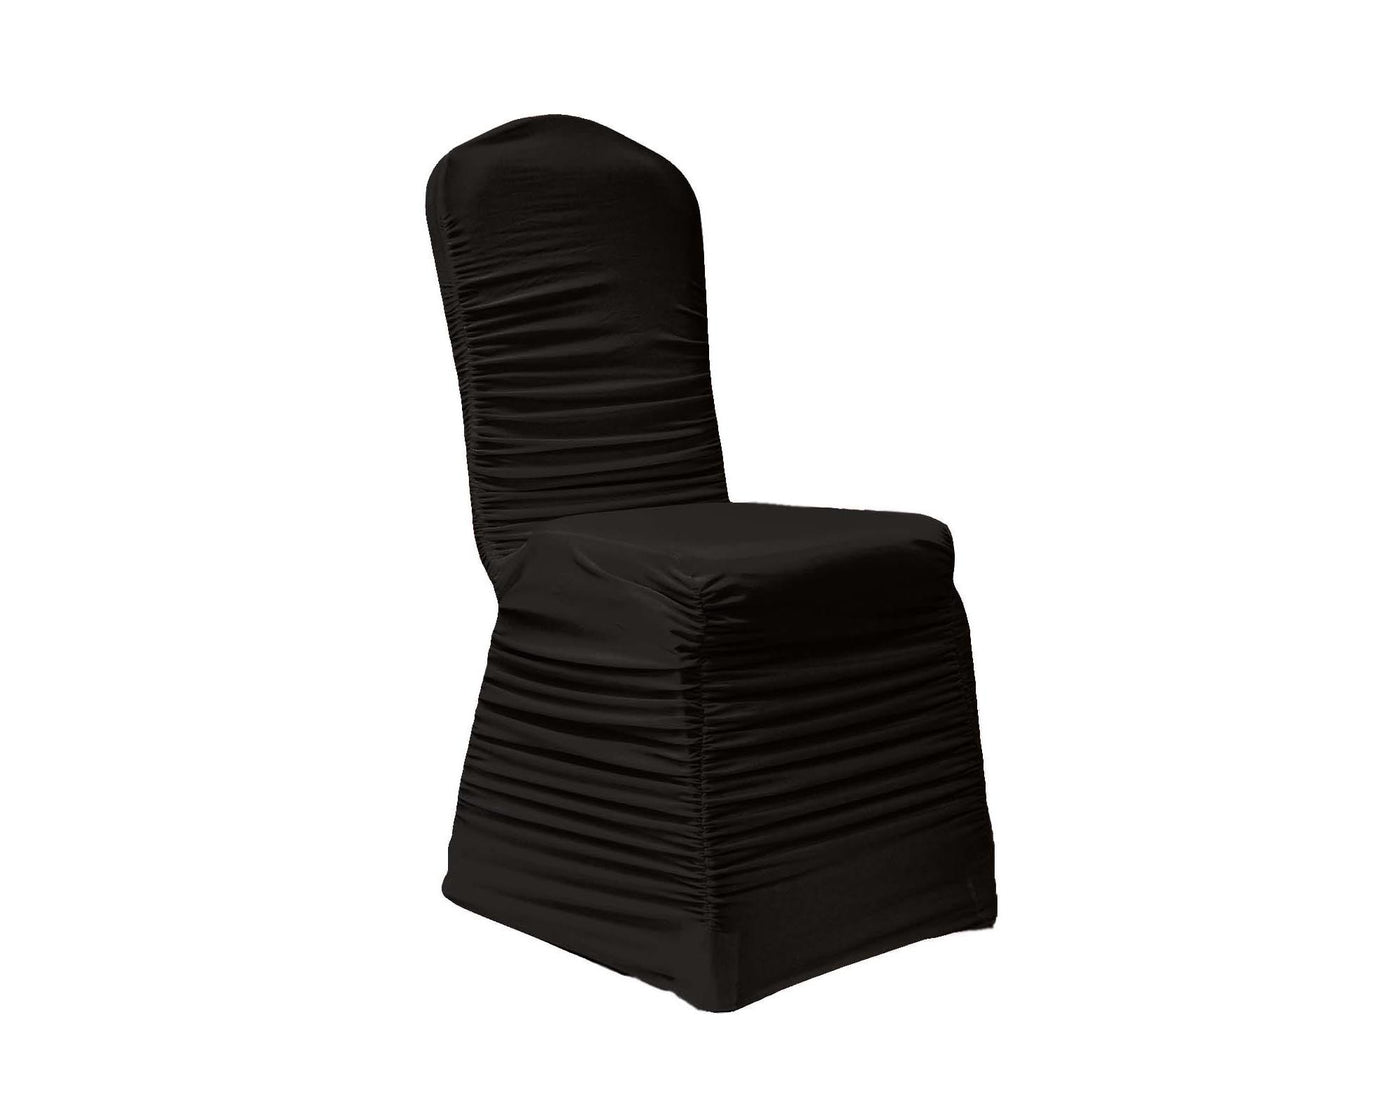 Chair with black spandex chair cover with ruched style